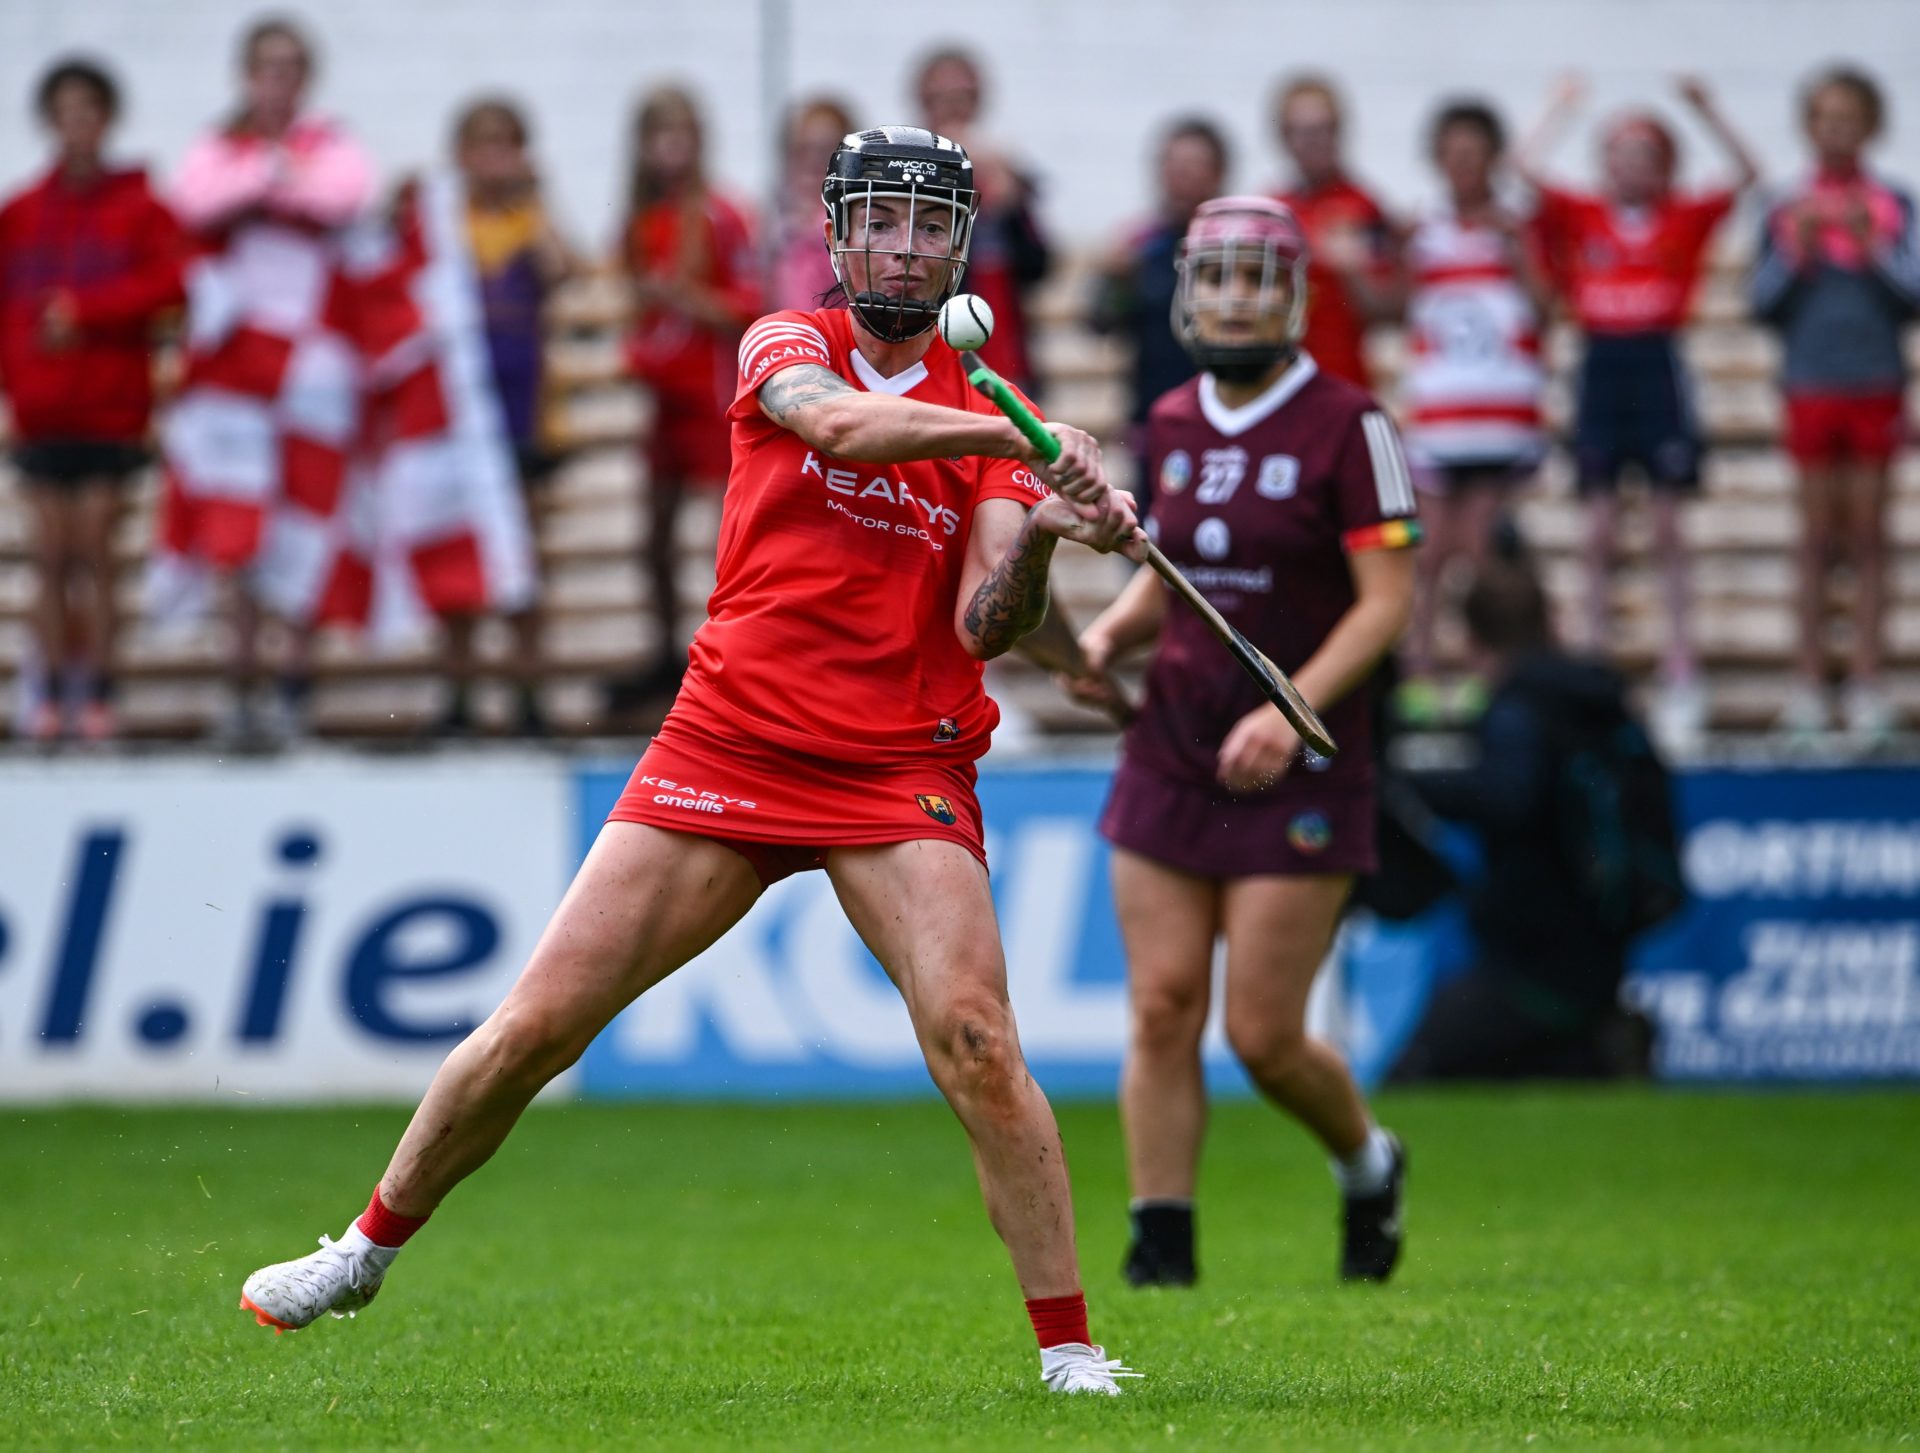 Cork’s Ashling Thompson during the All-Ireland Camogie Championship semi-final match between Cork and Galway at UPMC Nowlan Park in Kilkenny